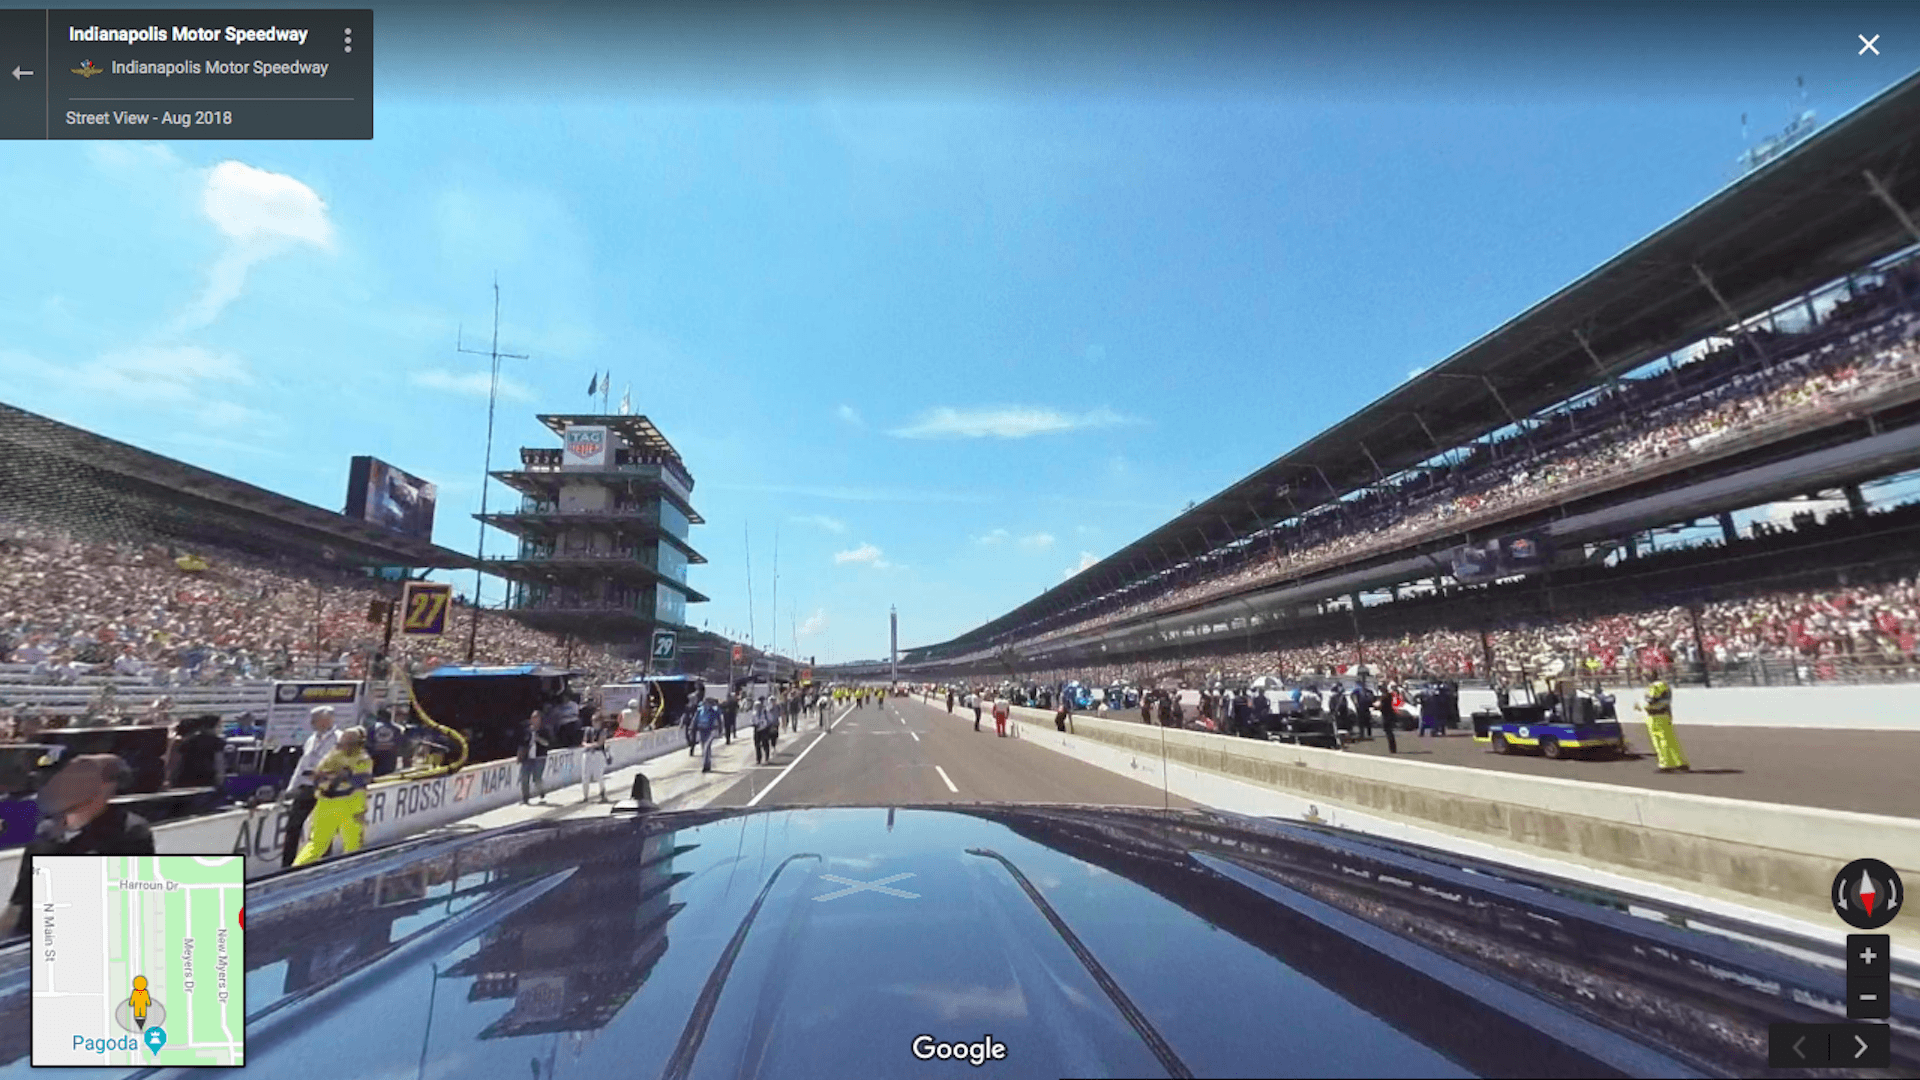 Racing Fans Worldwide Can Now Lap the Indianapolis Motor Speedway